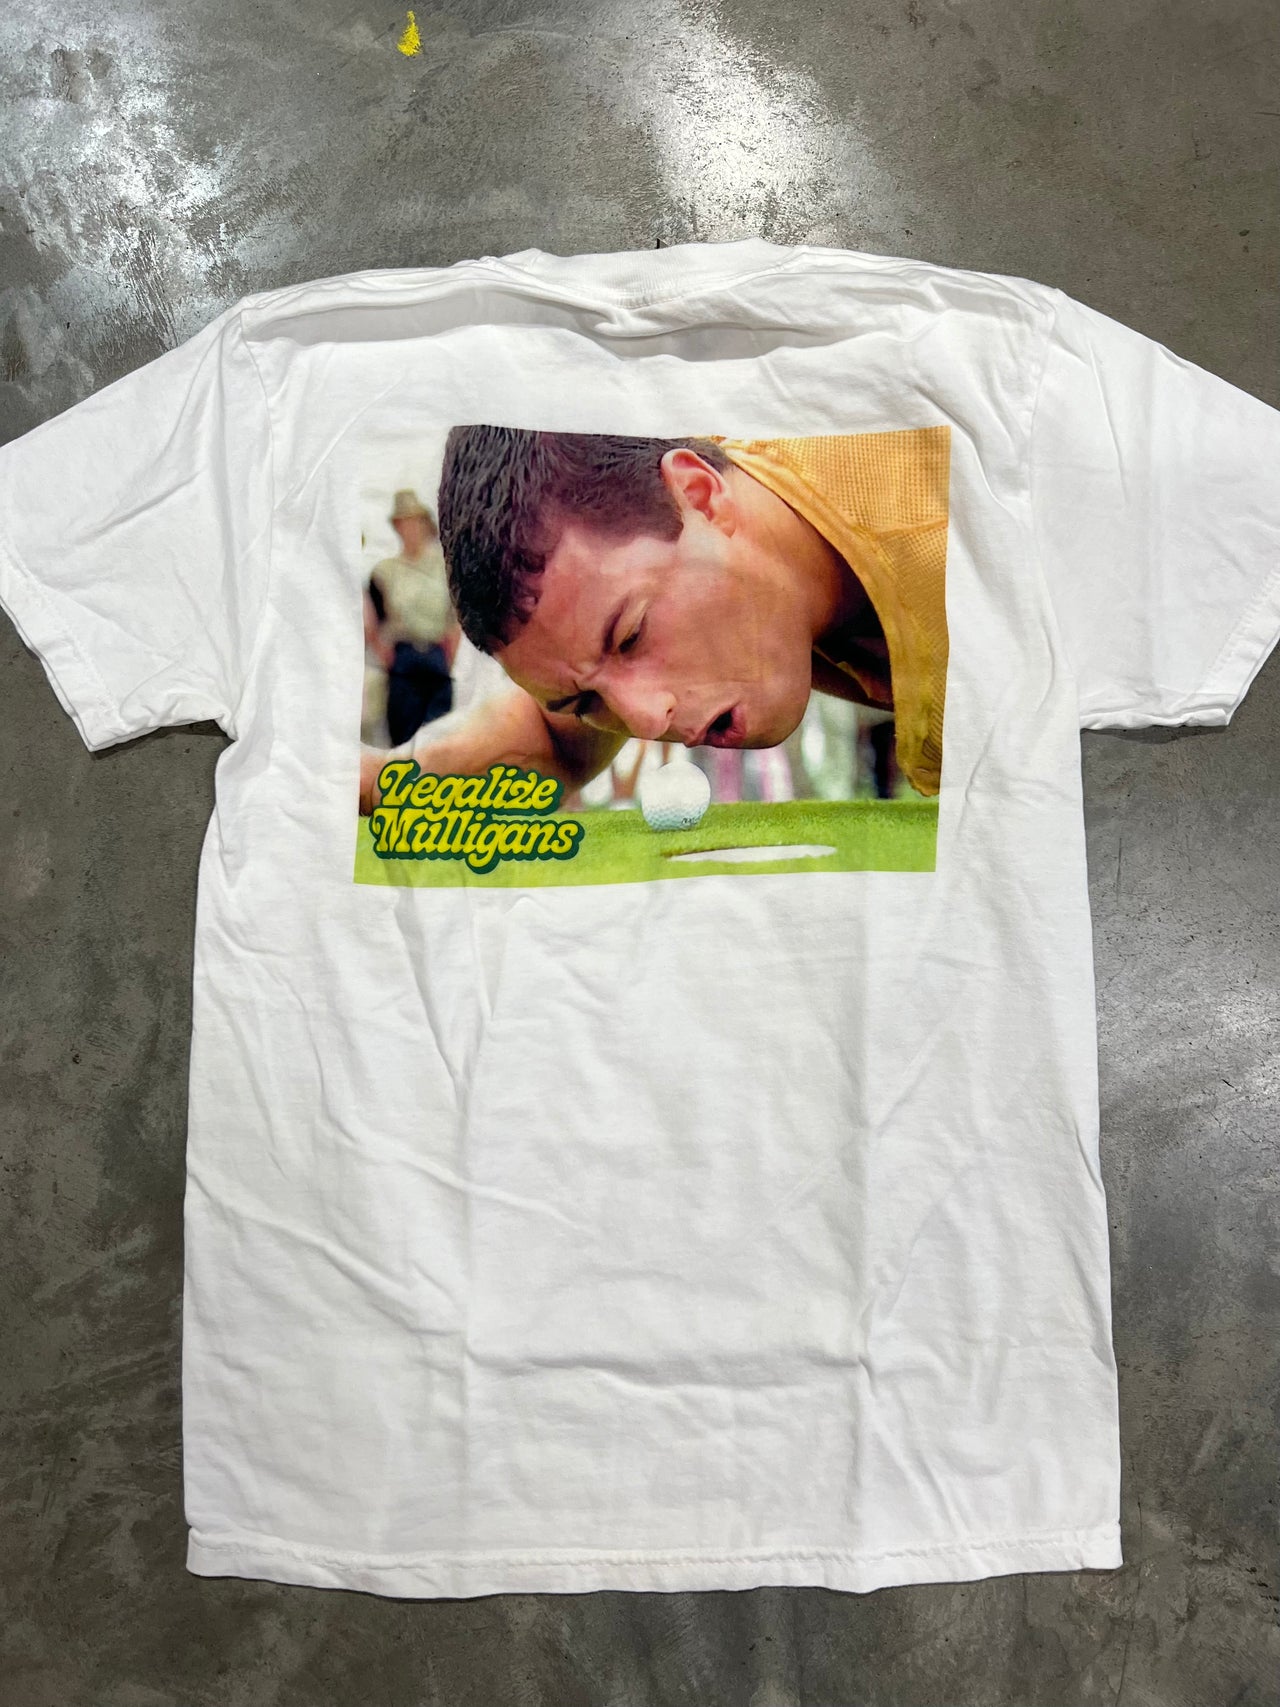 Adam Sandler in the movie Happy Gilmore on a short sleeve shirt. Legalize Mulligans Old Row shirts